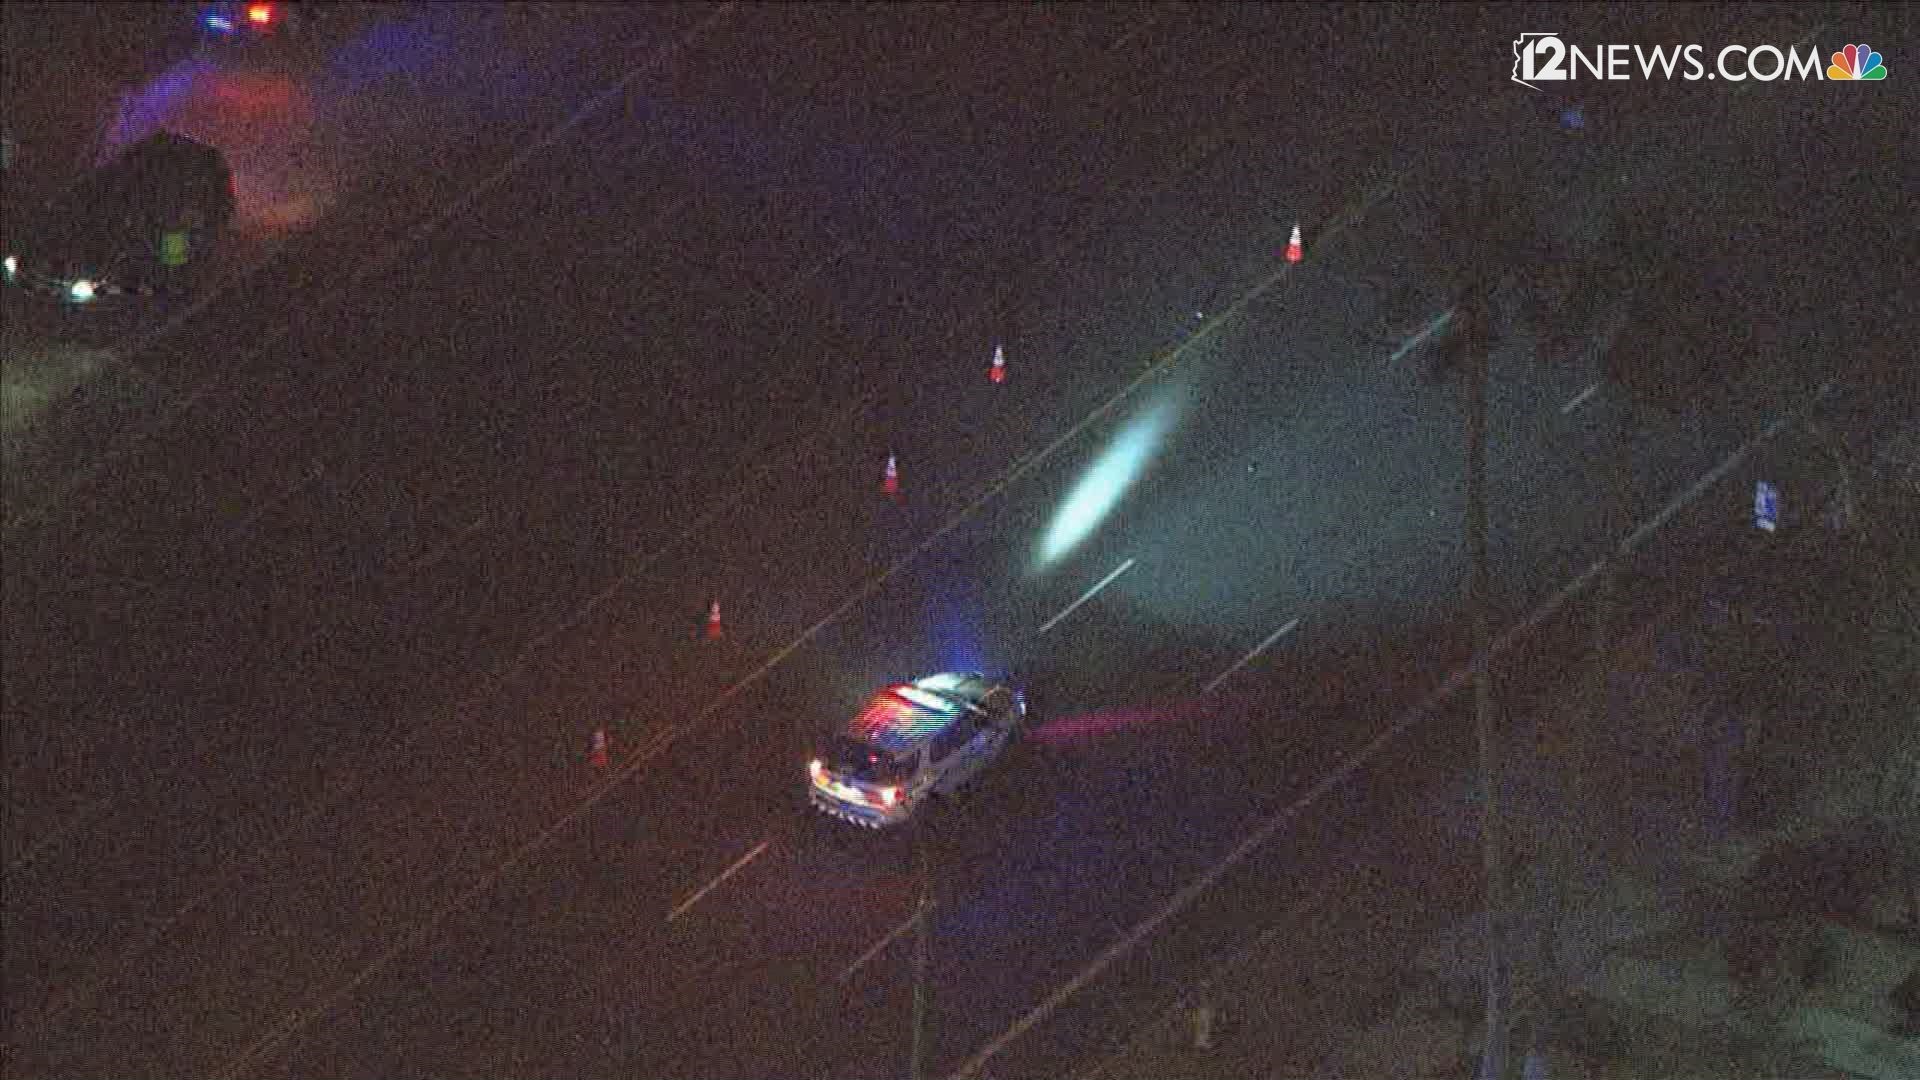 A female pedestrian was struck and killed while crossing the street on Scottsdale Rd. The woman was transported to the hospital where she was declared dead. The driver of the car that struck her remained on the scene.